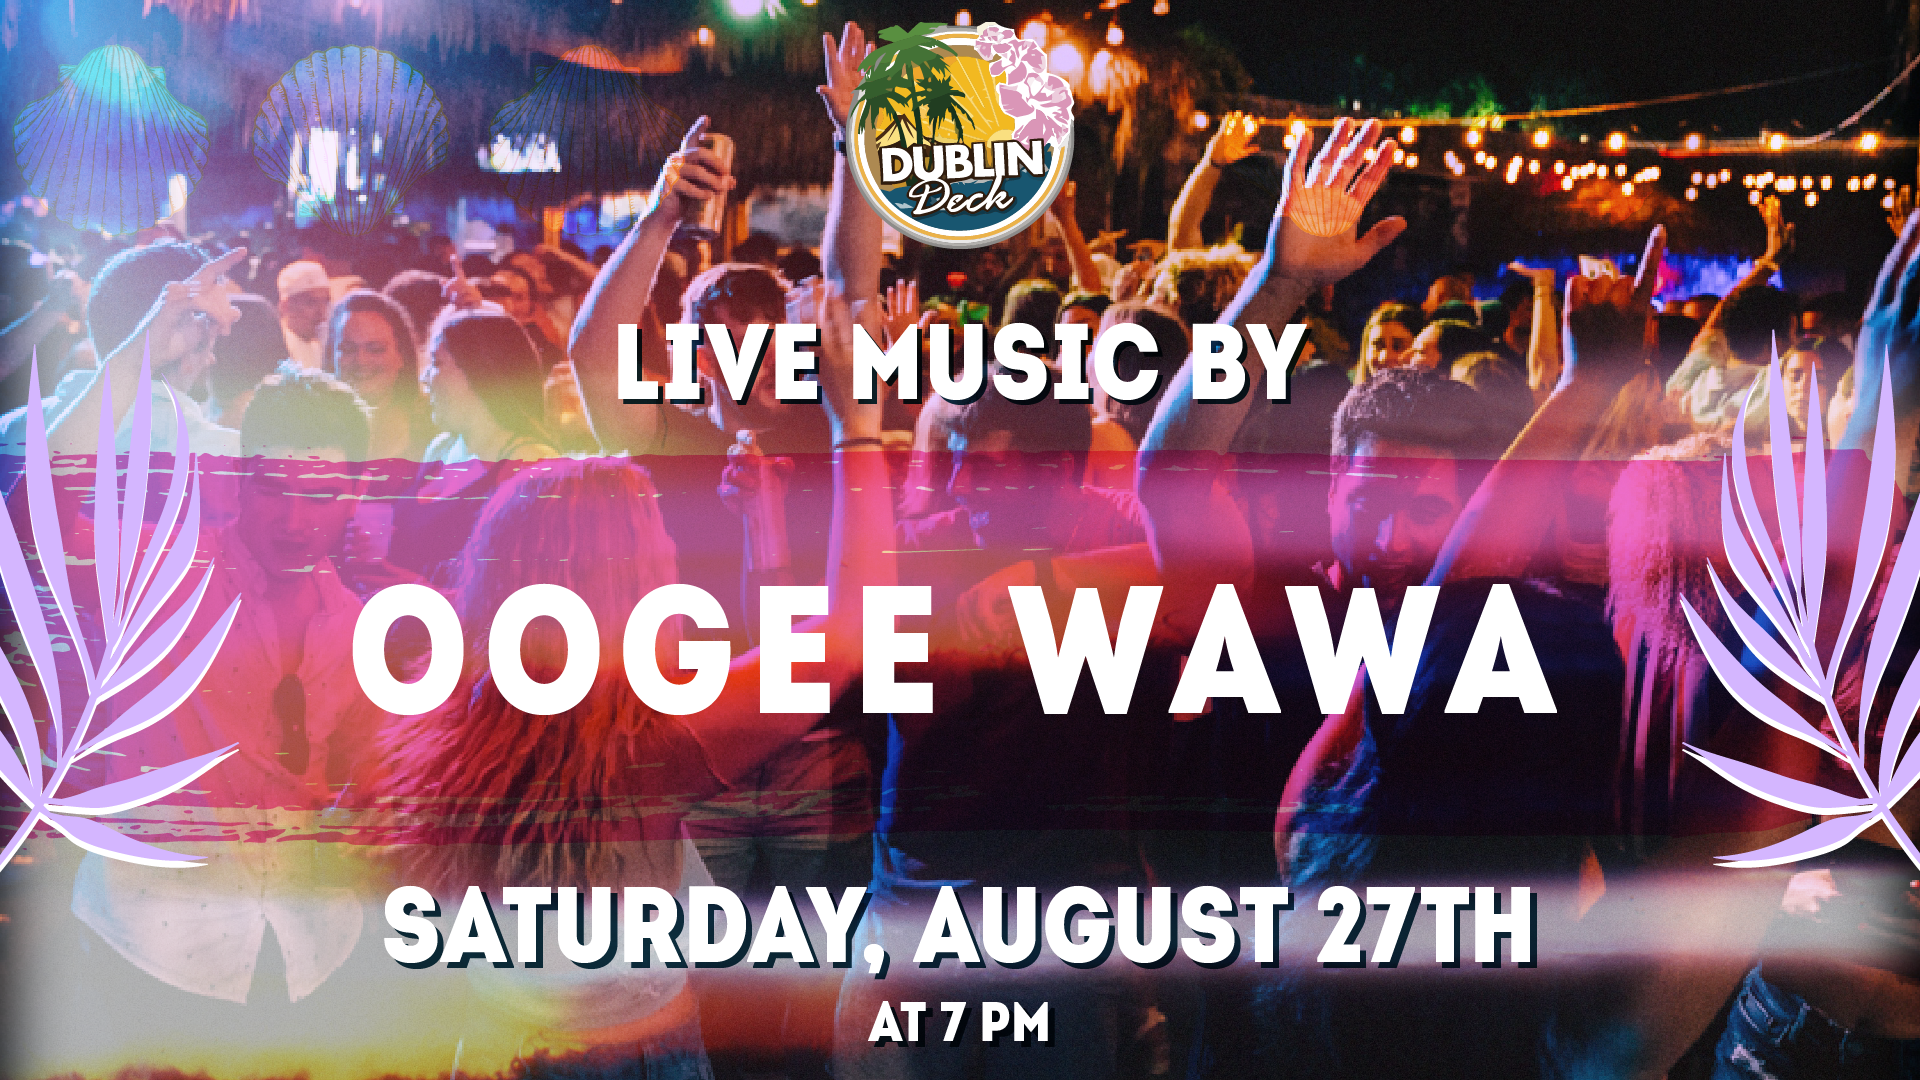 Enjoy the sounds of Oogee Wawa at Dublin Deck! Music begins at 7PM